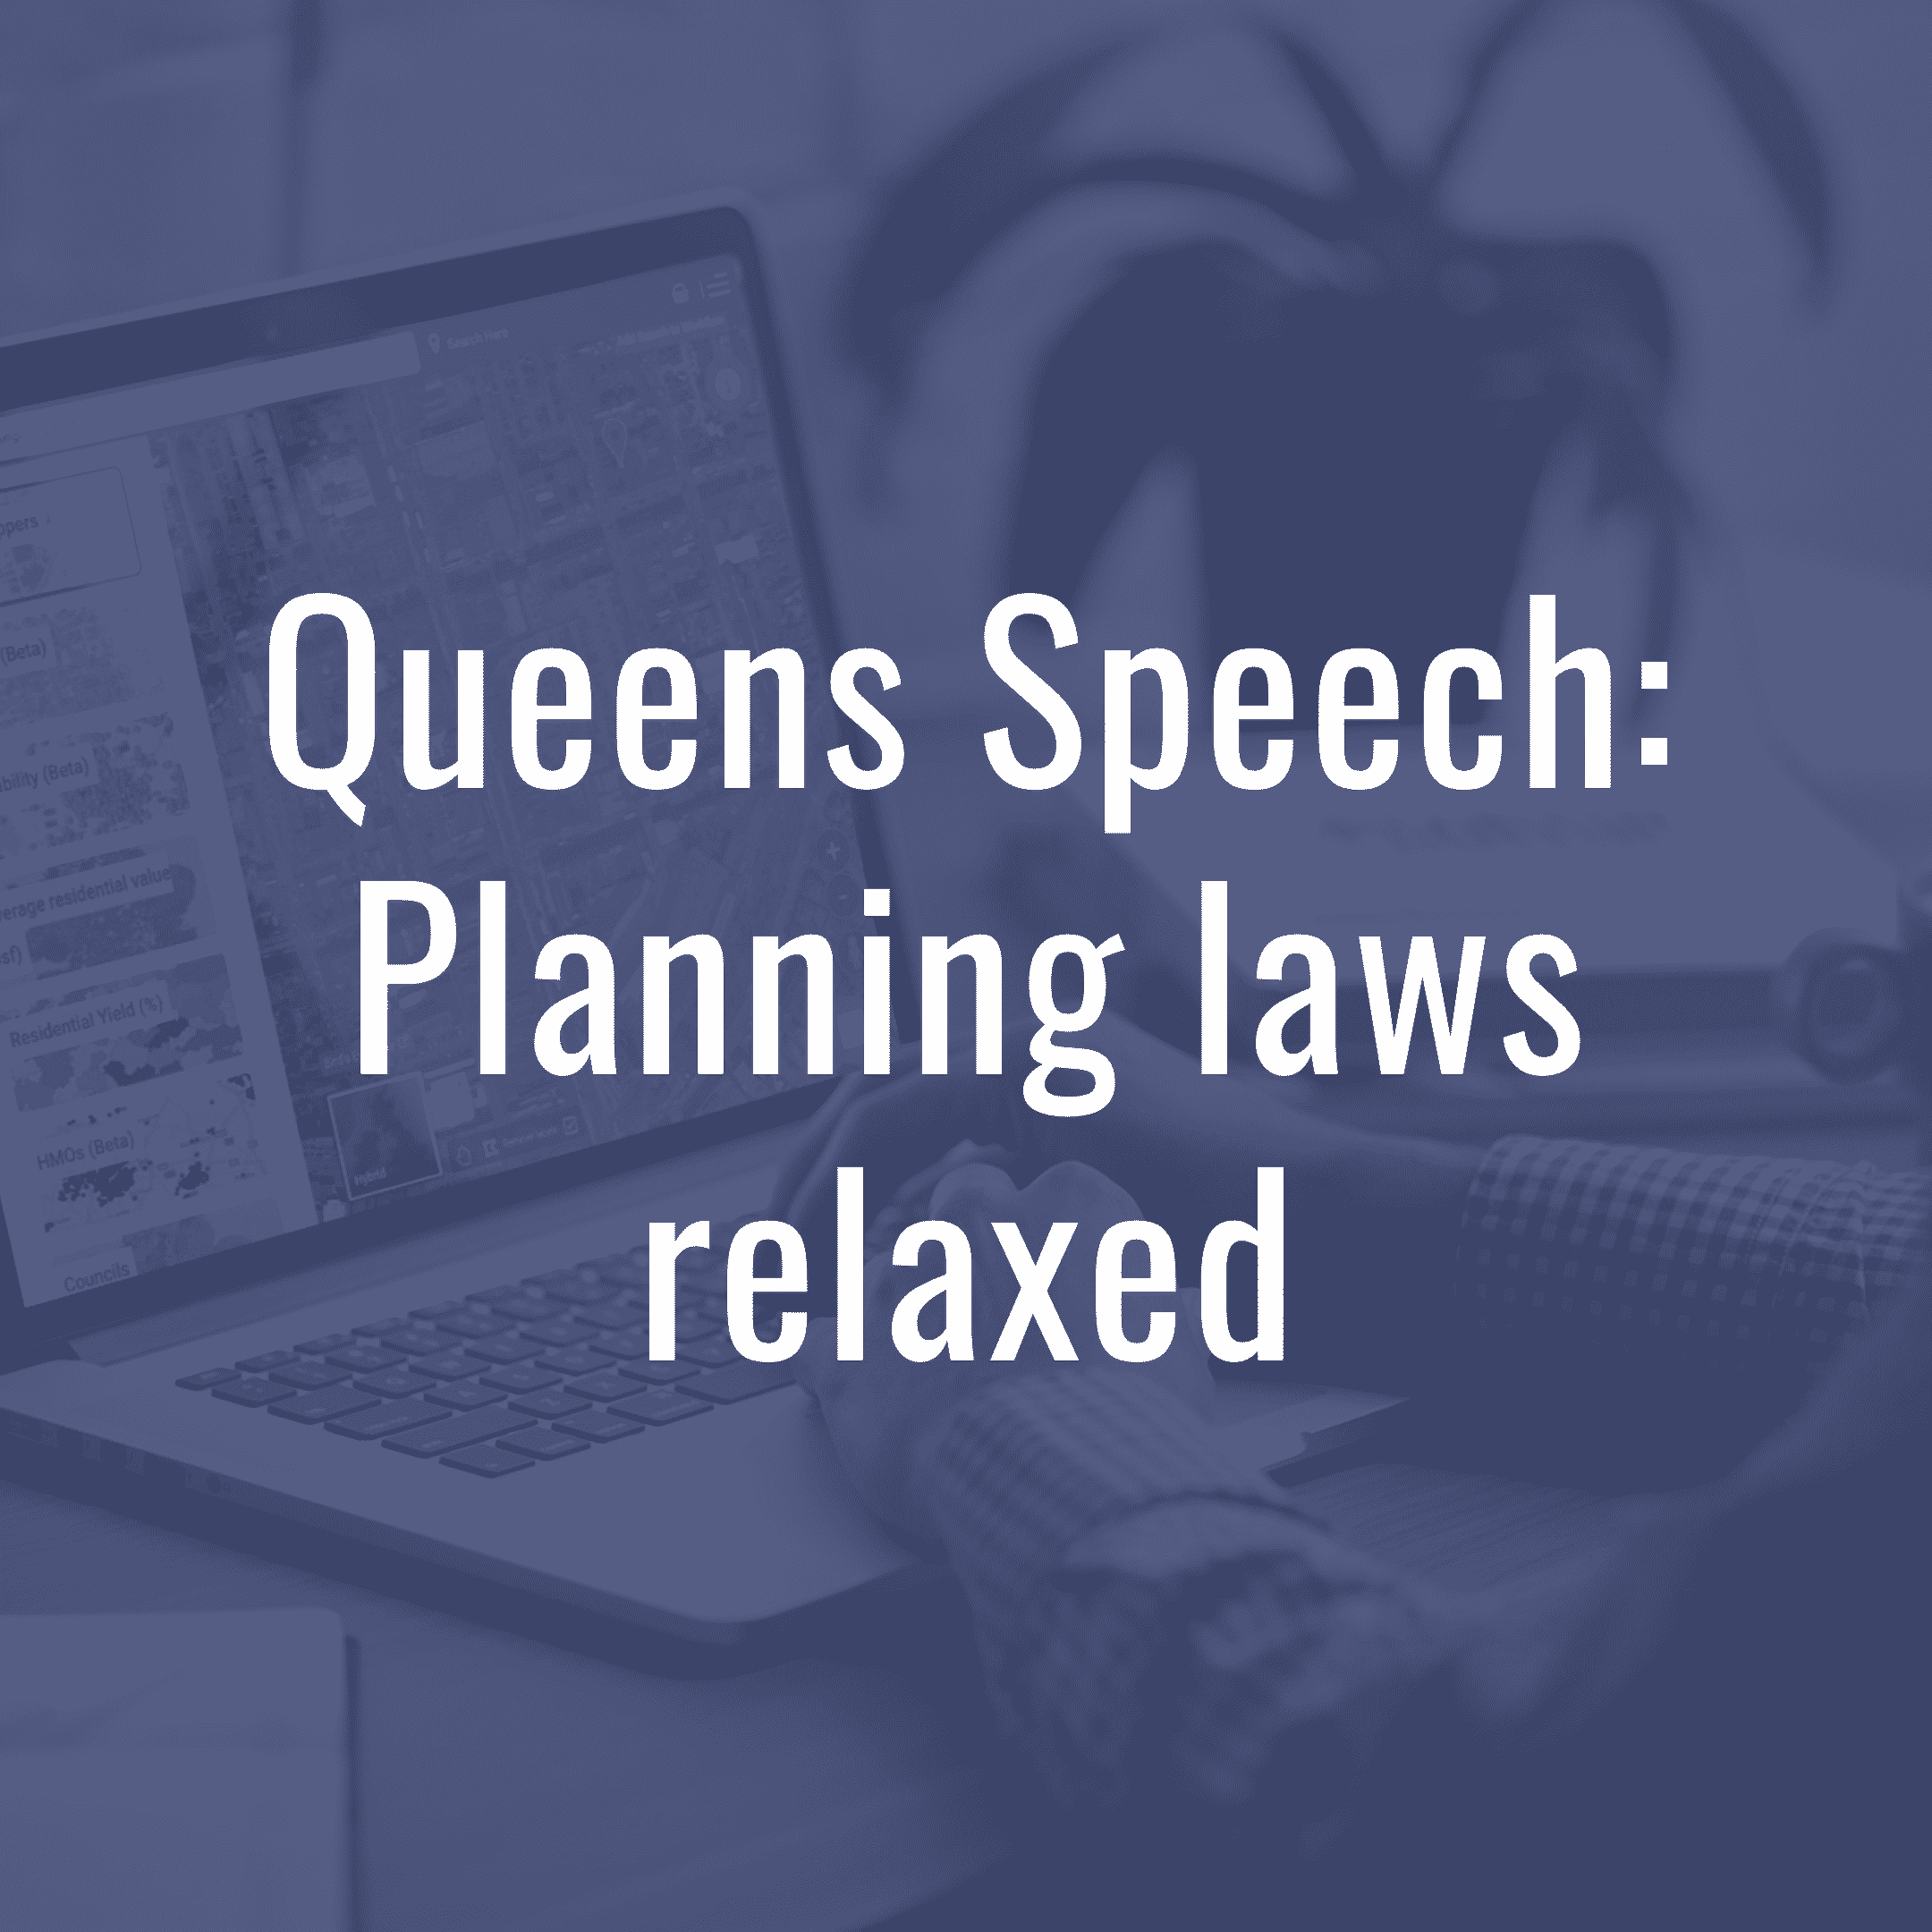 Queens Speech: Planning laws relaxed